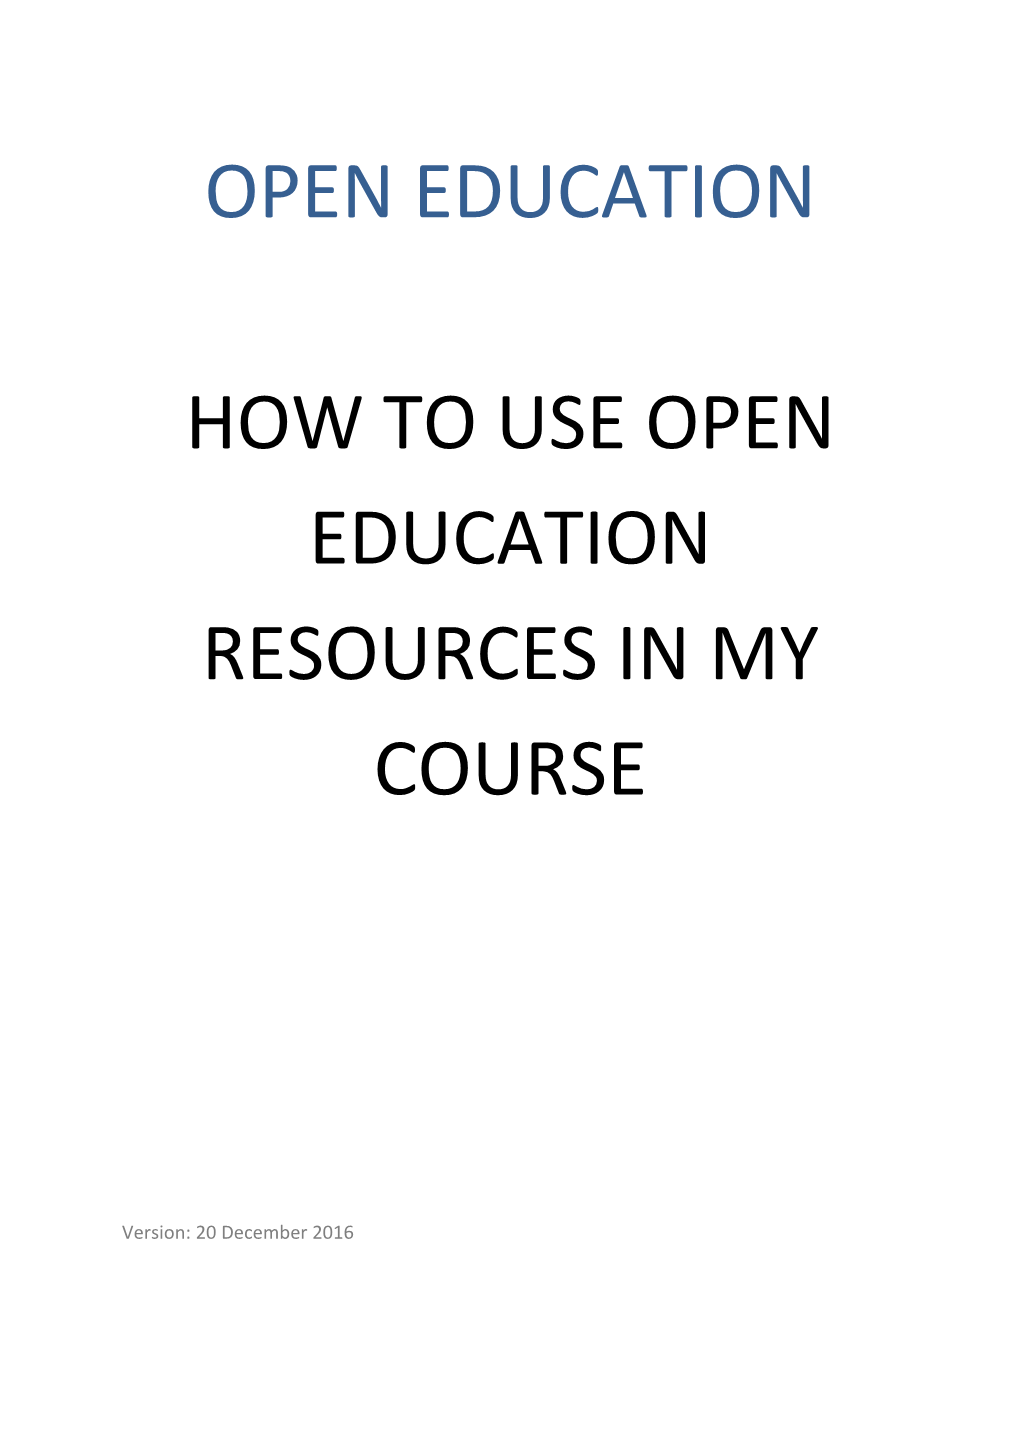 Open Education How to Use Open Education Resources